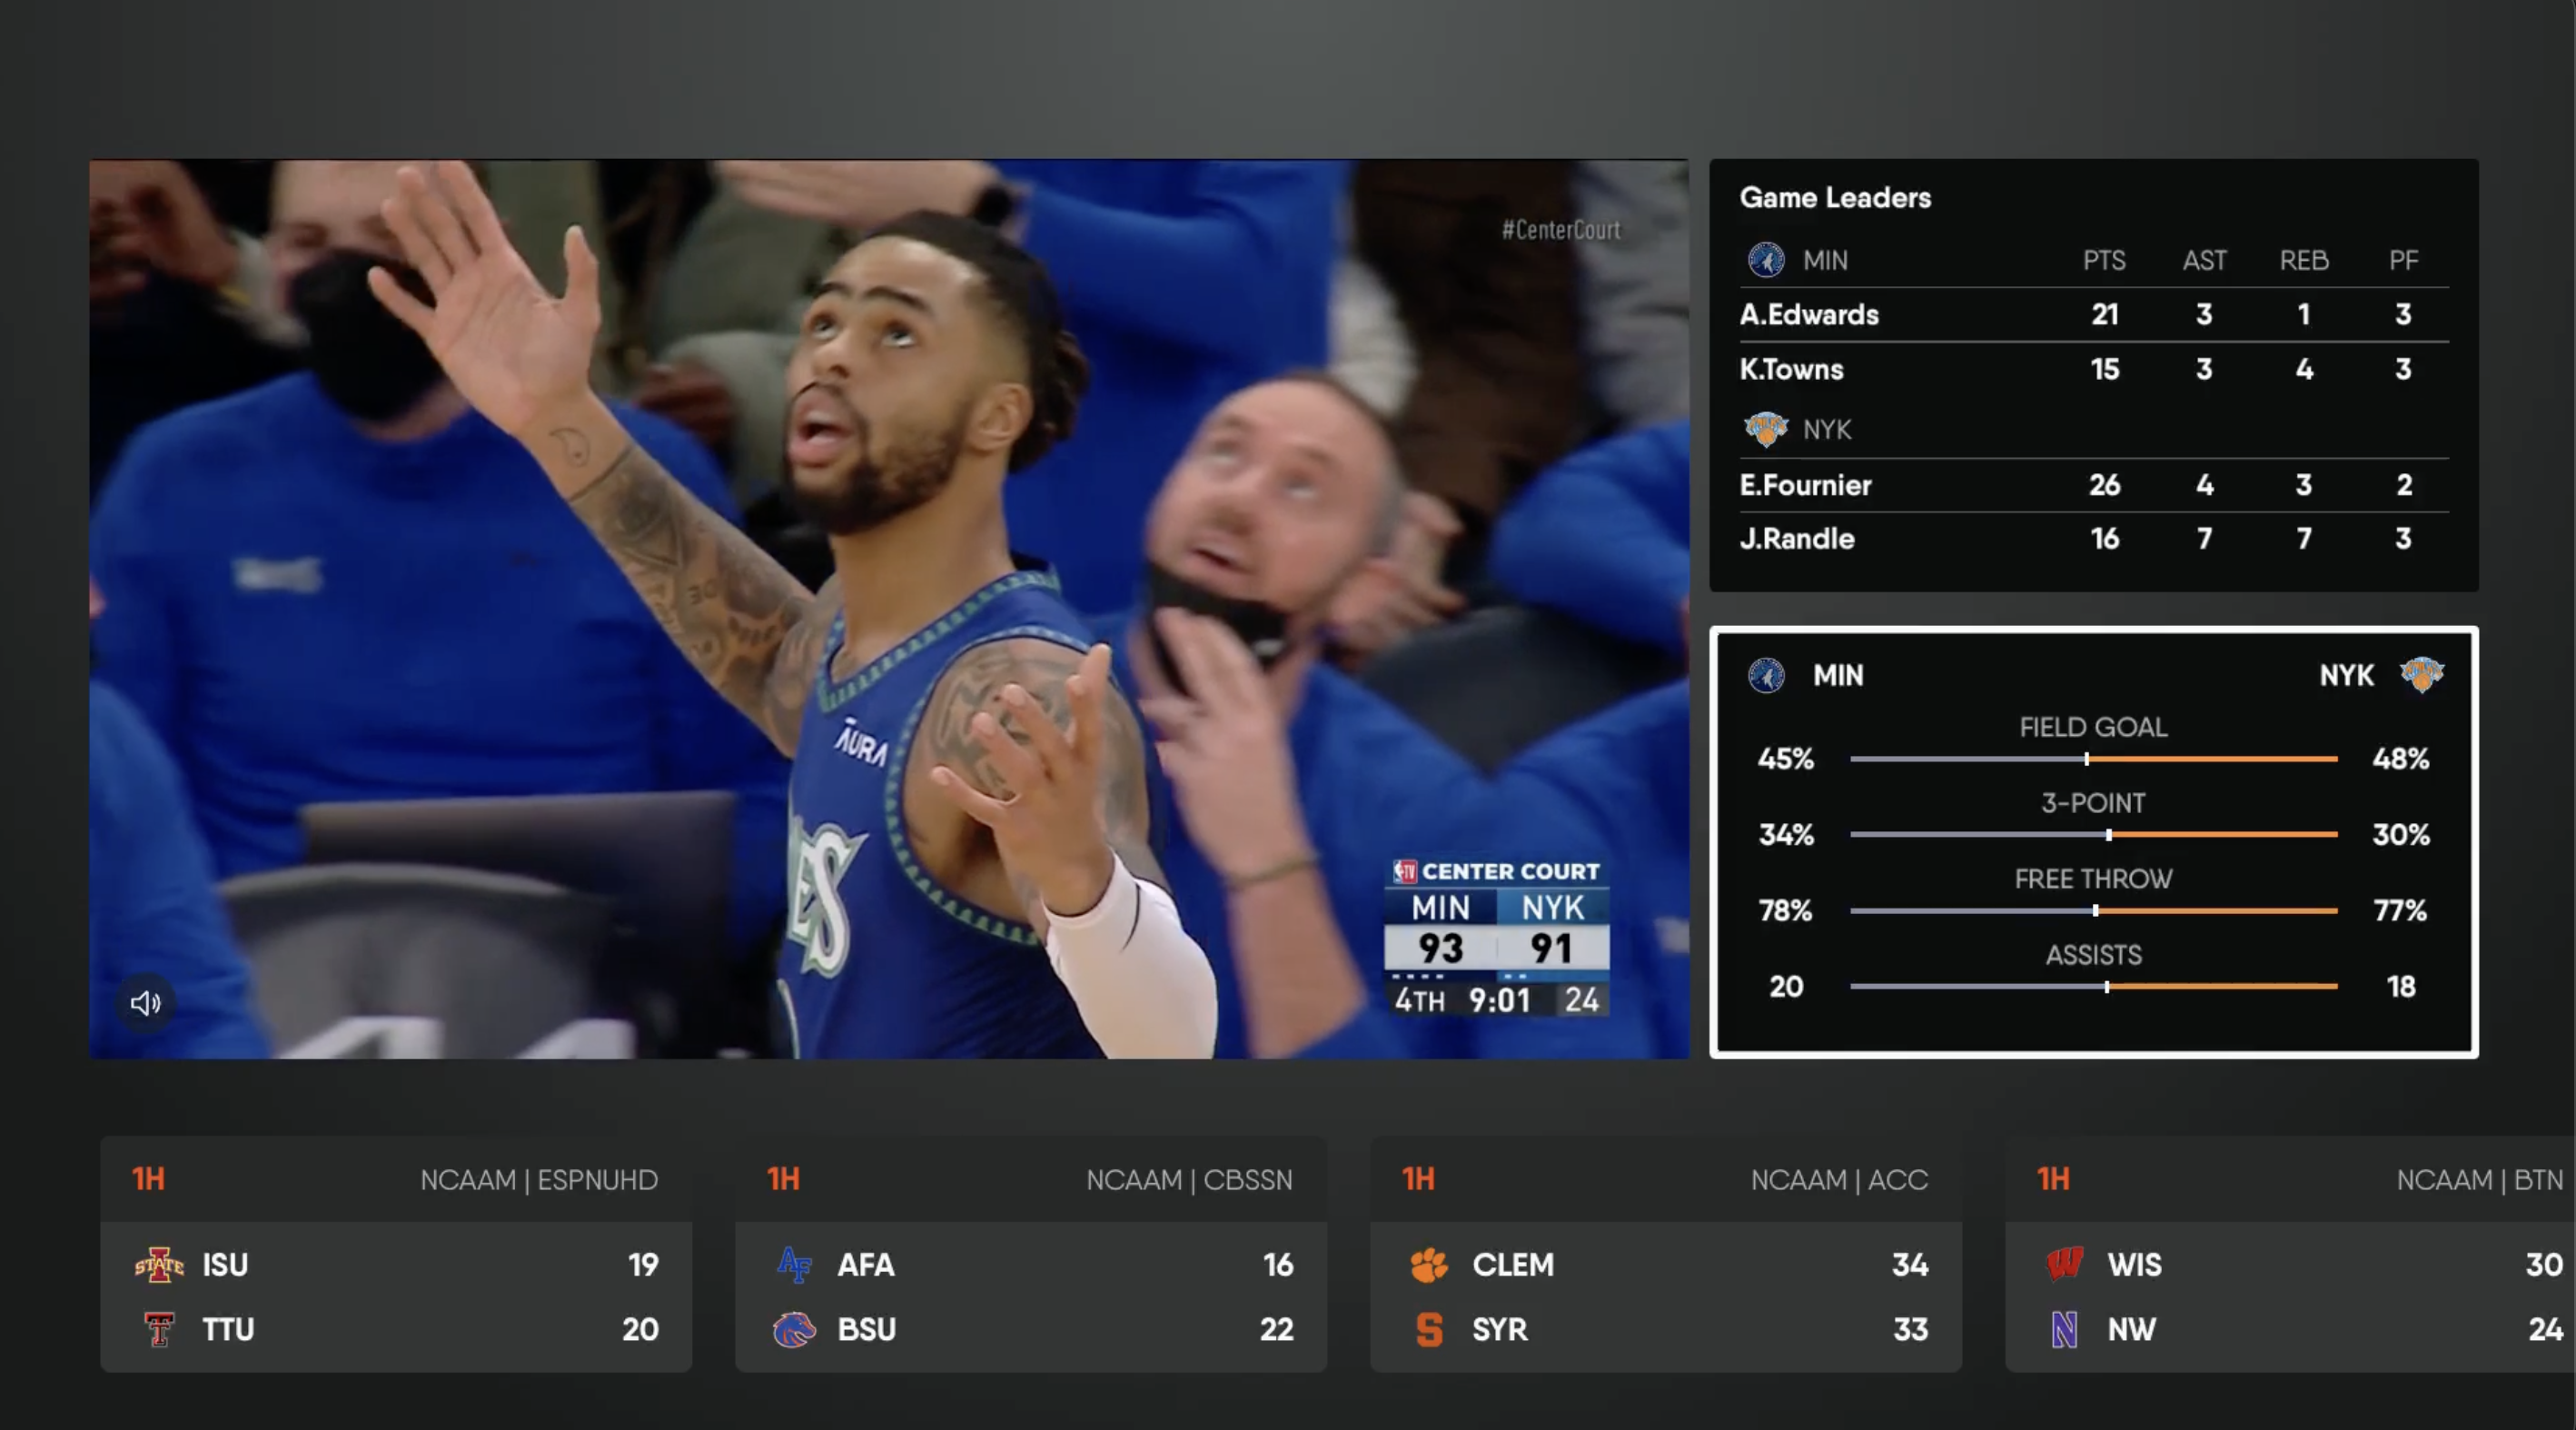 MultiView for the FuboTV app on Apple TV enabled with live video, team stats, and game stats shown on screen